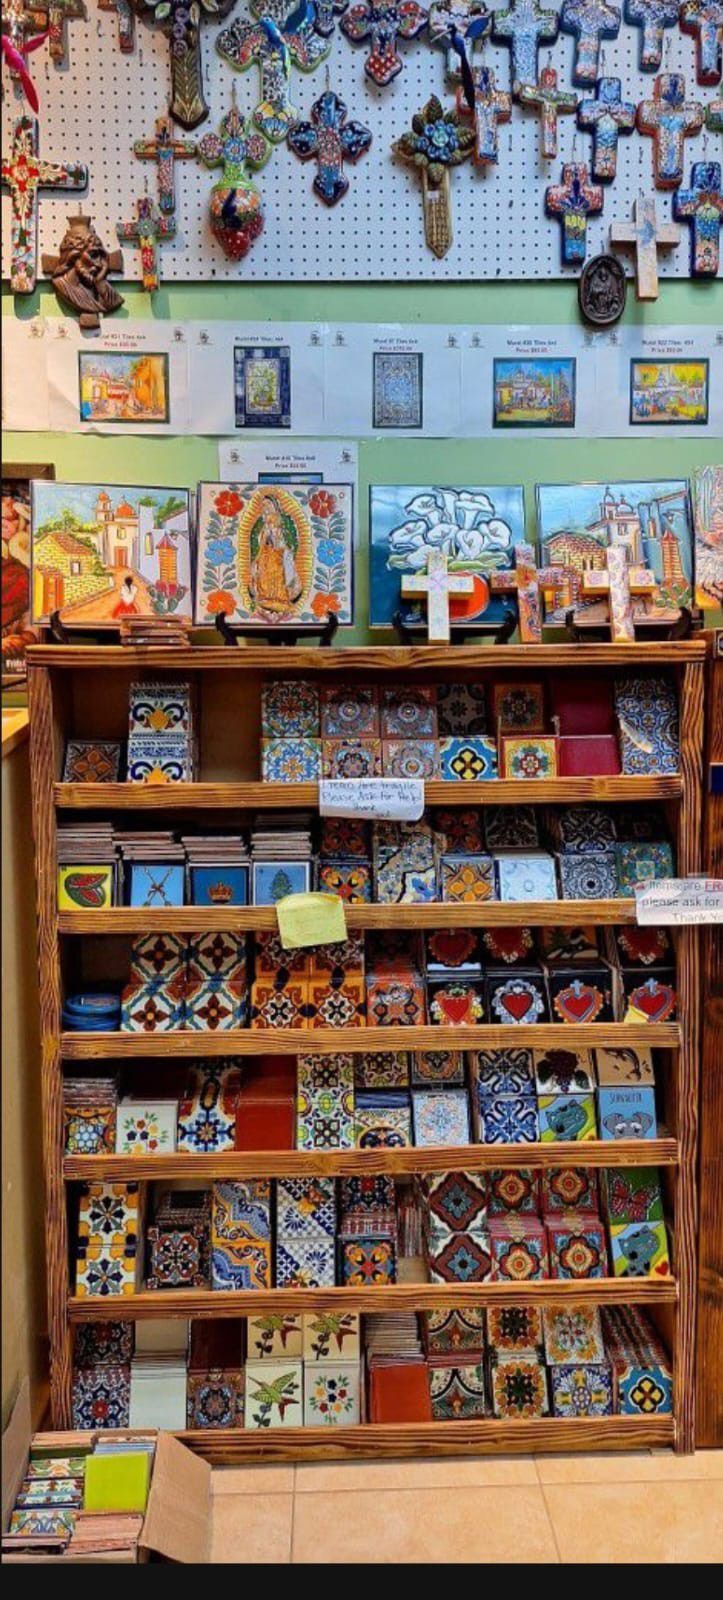 Talavera Tile 4"x 4" 💥12031 Firestone Blvd Norwalk CA Open Every Day From 9am To 7pm